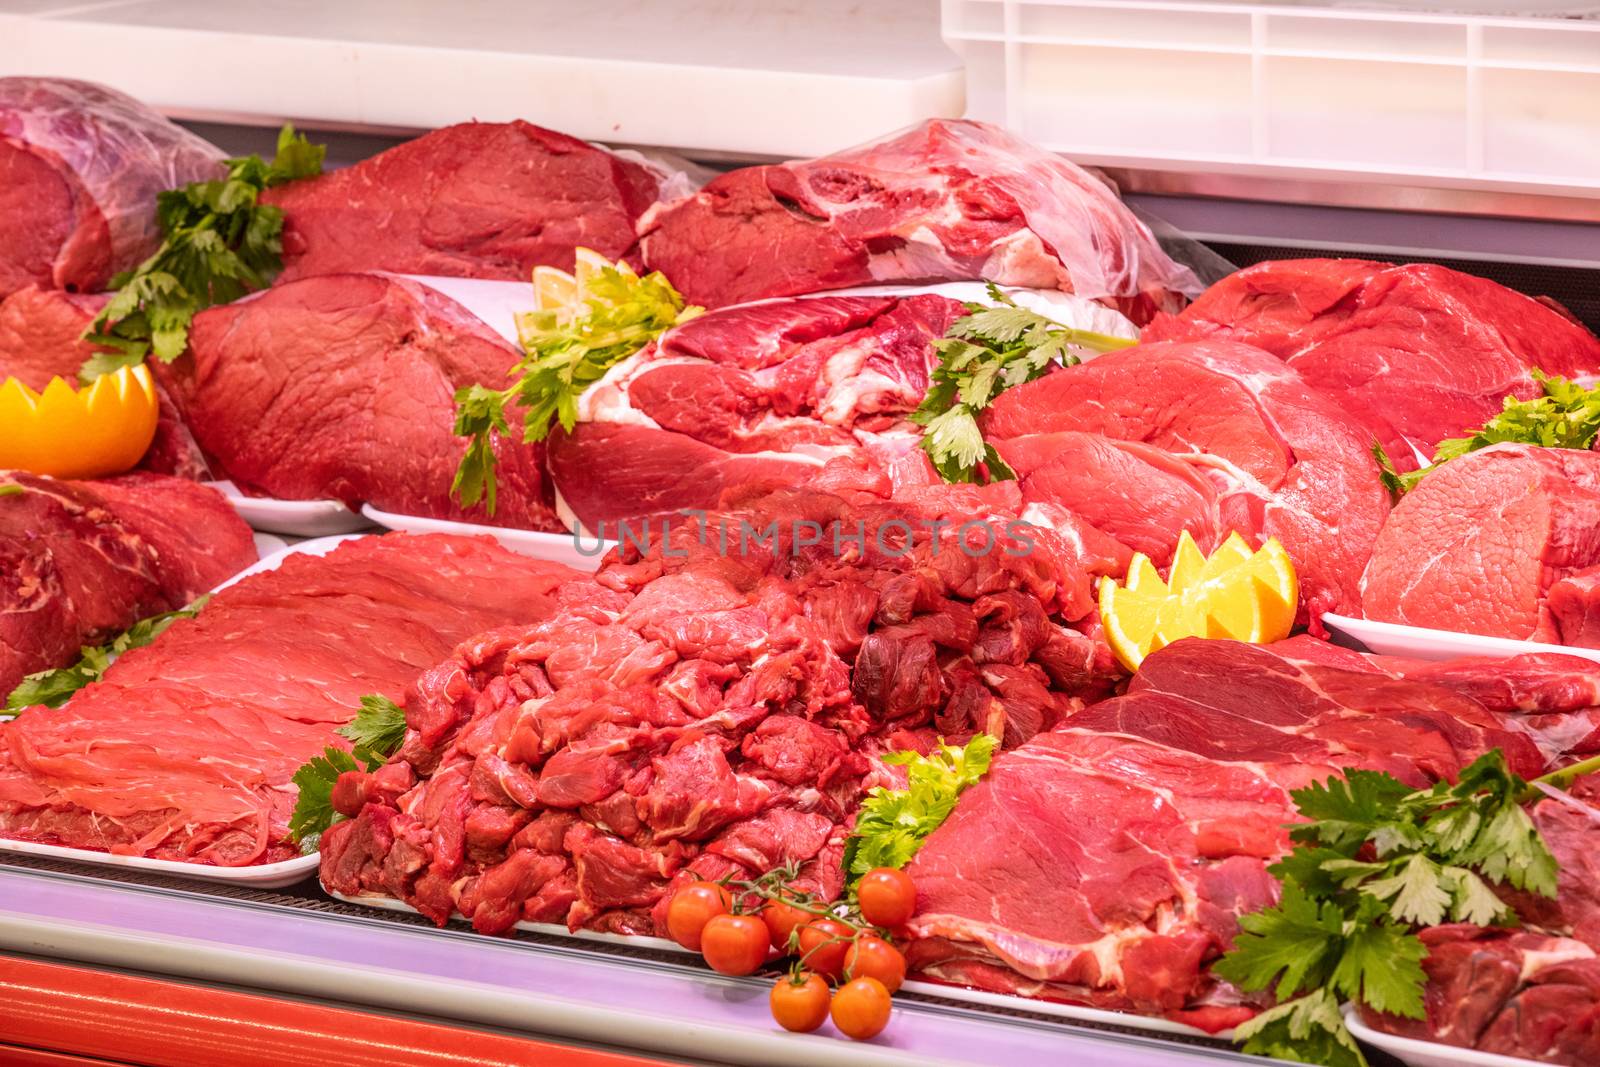 Meat department in butchery inside a mall. Various types of meat displayed in an orderly and creative way. Shelves of a food supermarket. Orange and vegetables for decoration and topping.